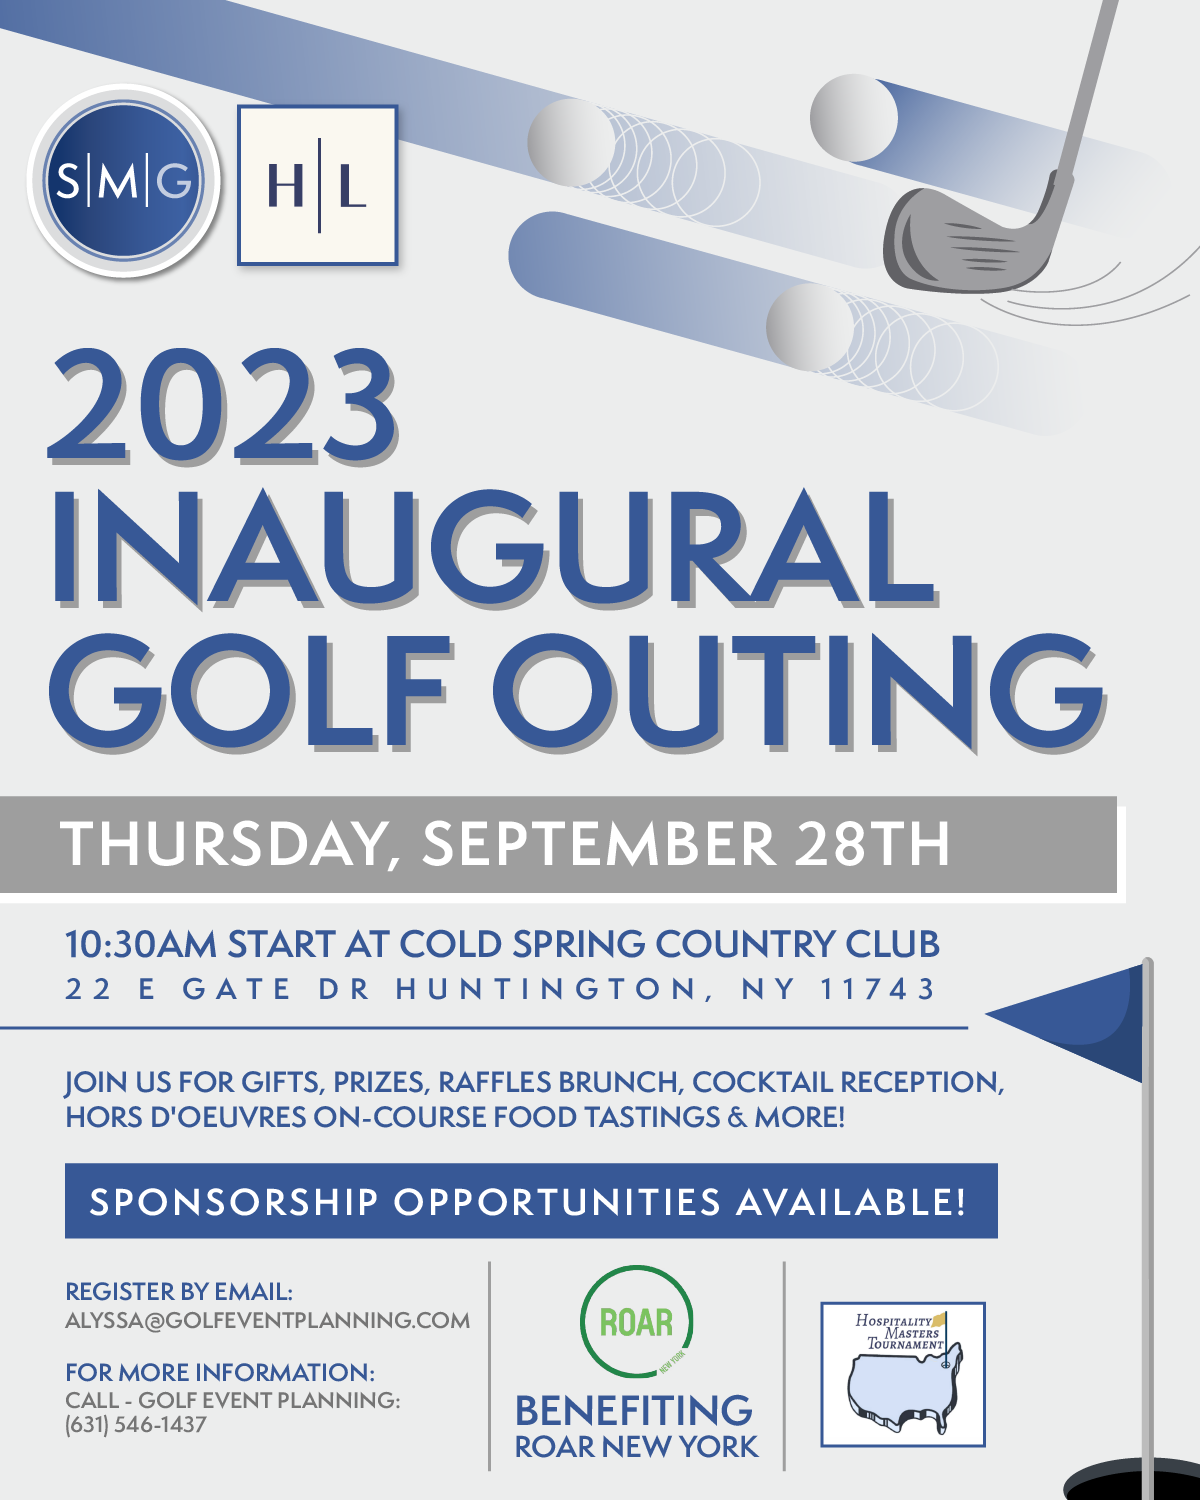 2023 Inaugural Golf Outing on Sept. 28th 2023